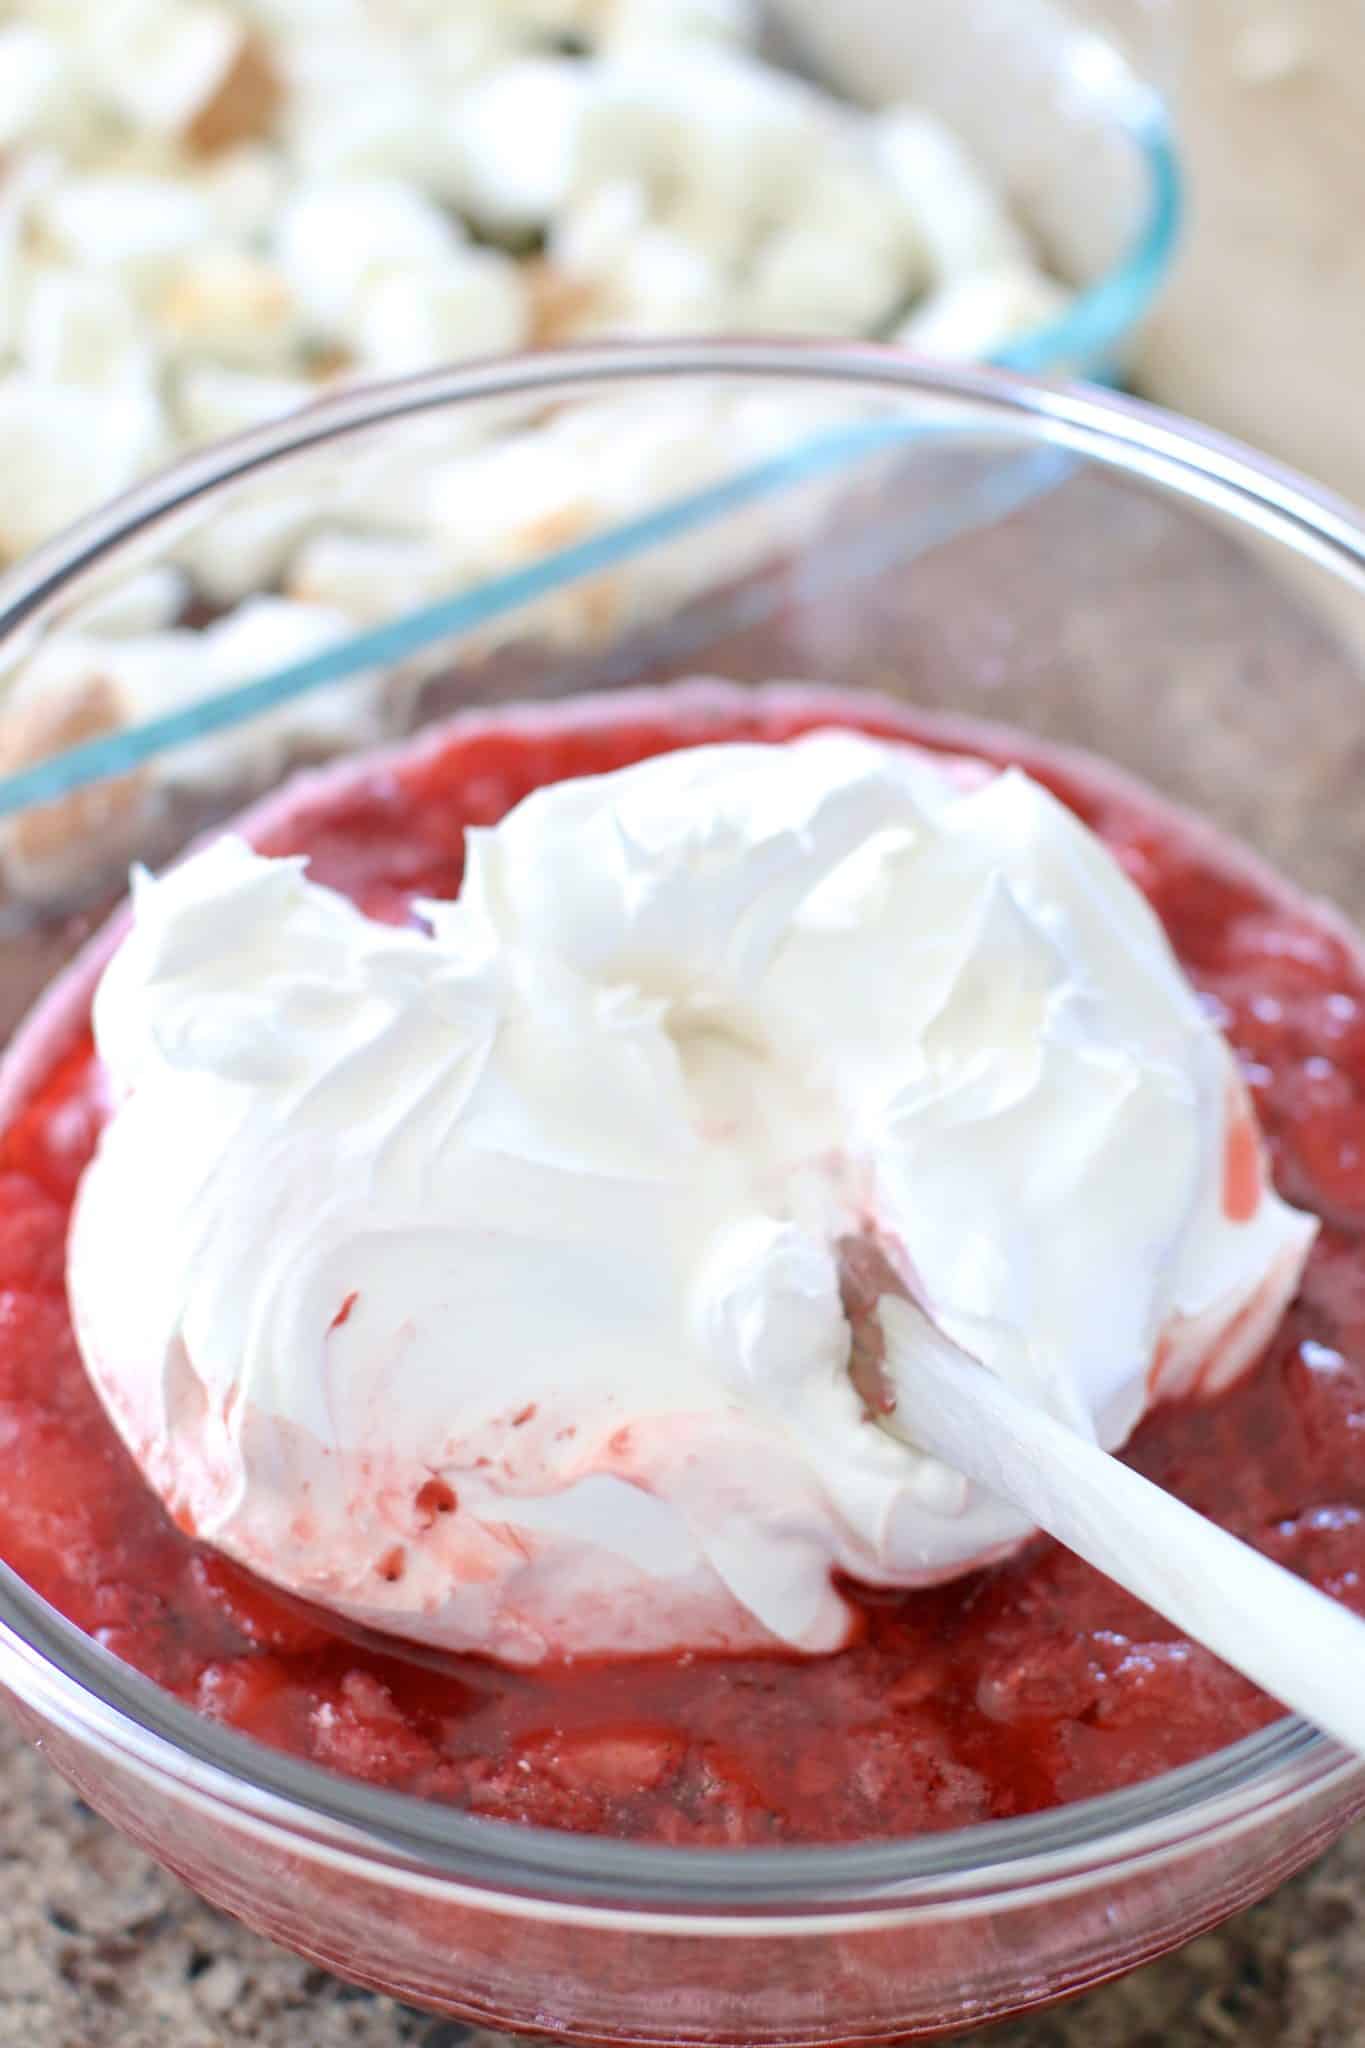 cool whip whipped topping added to frozen strawberries and strawberry gelatin mixture in a glass mixing bowl with a wooden spoon.